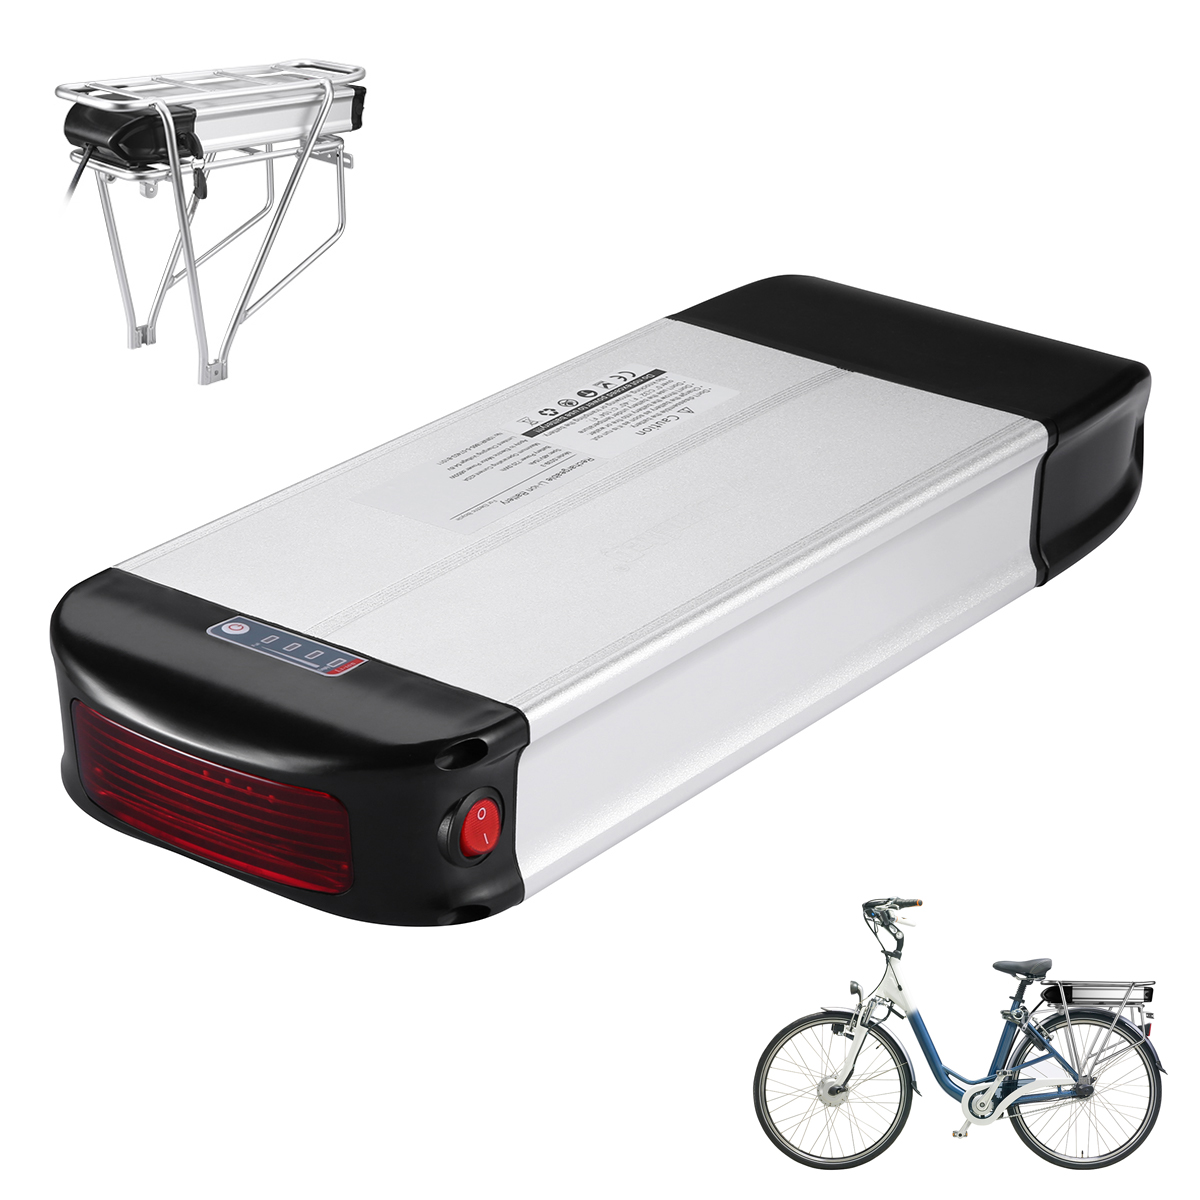 Find EU Direct HANIWINNER HA074 04 36V 20Ah 720W E bike Battery Rechargeable Lithium Li ion Battery with Rear Bike Frame Taillight for Electric Bicycle for Sale on Gipsybee.com with cryptocurrencies